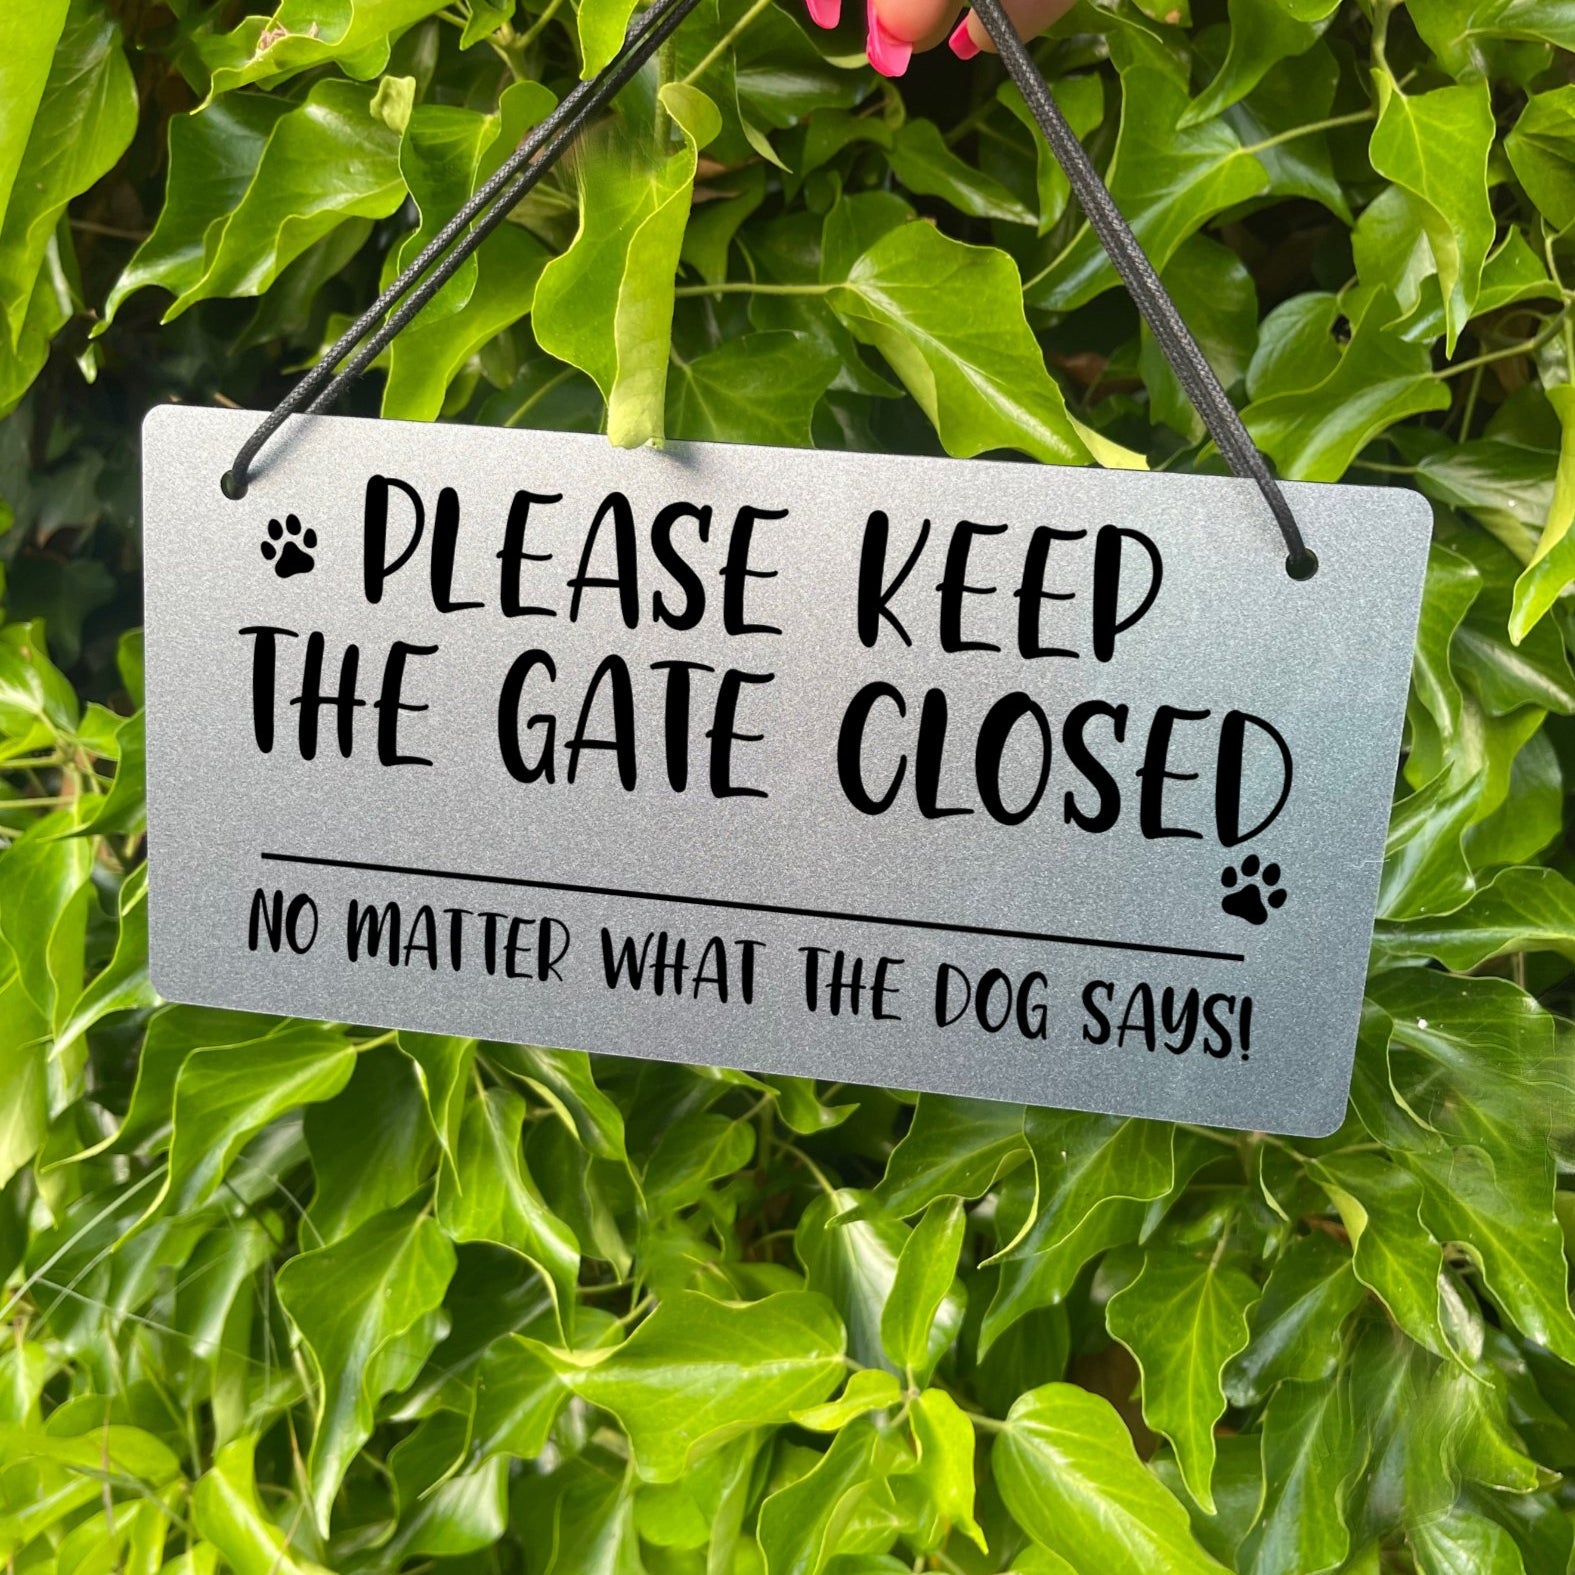 "Silver Laser-Engraved 'Please Keep the Gate Closed' Sign with Paw Print Illustration" Description: Close-up of a silver-colored acrylic sign with laser-engraved text that reads "Please Keep the Gate Closed, No Matter What the Dog Says." The sign features a cute paw print illustration, adding a playful touch.